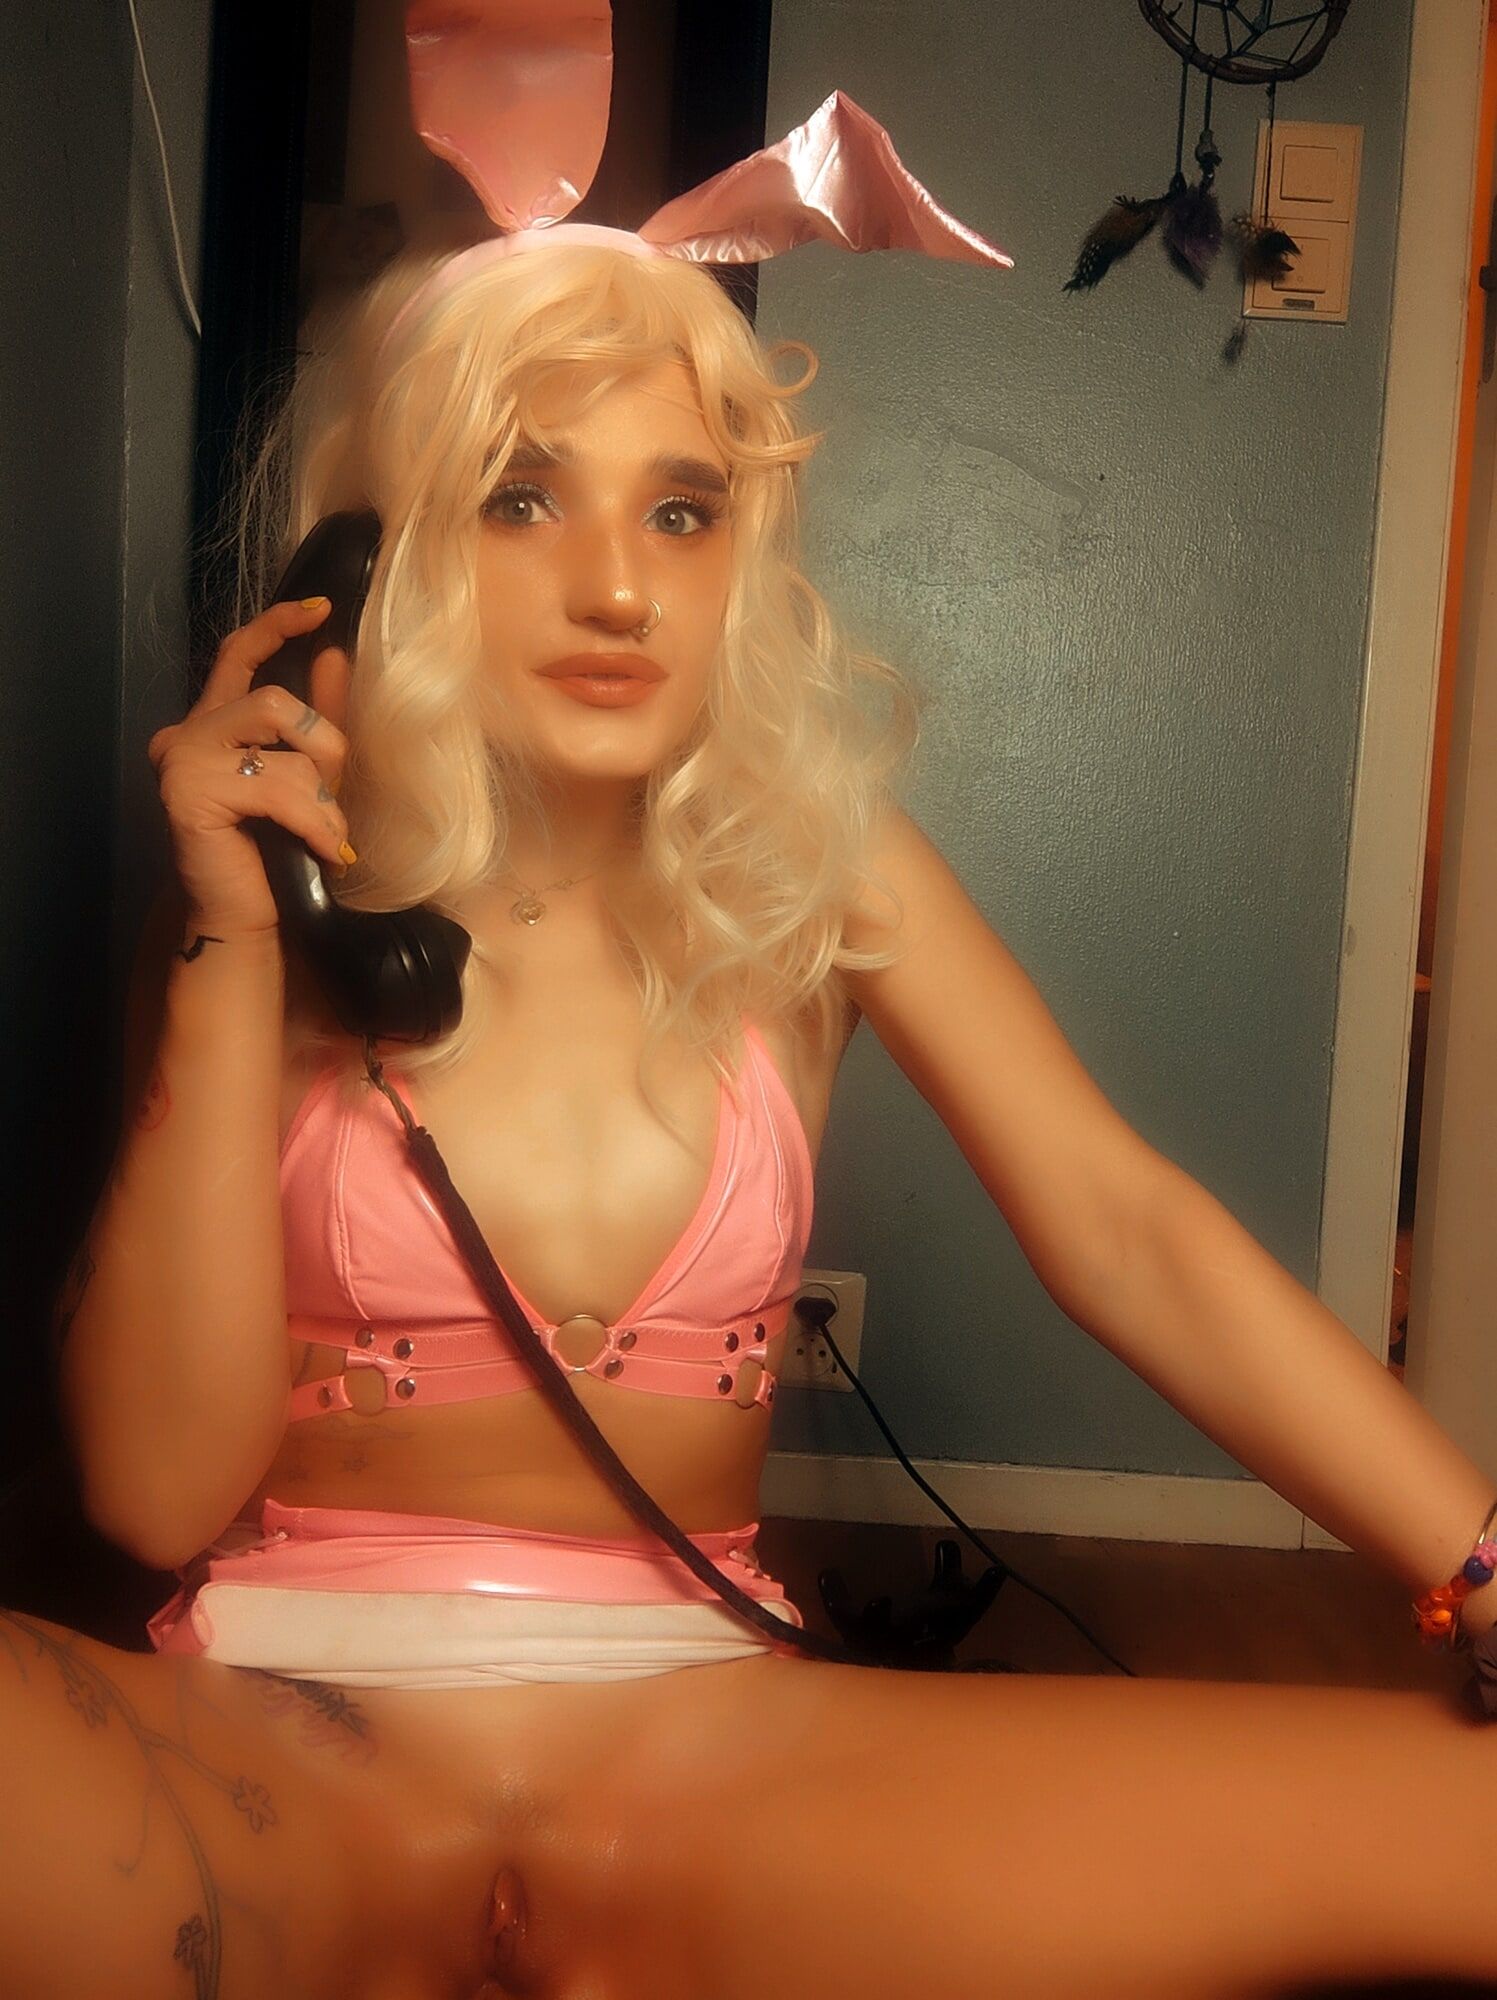 Pink bunny talking on the phone while showing off pussy #31